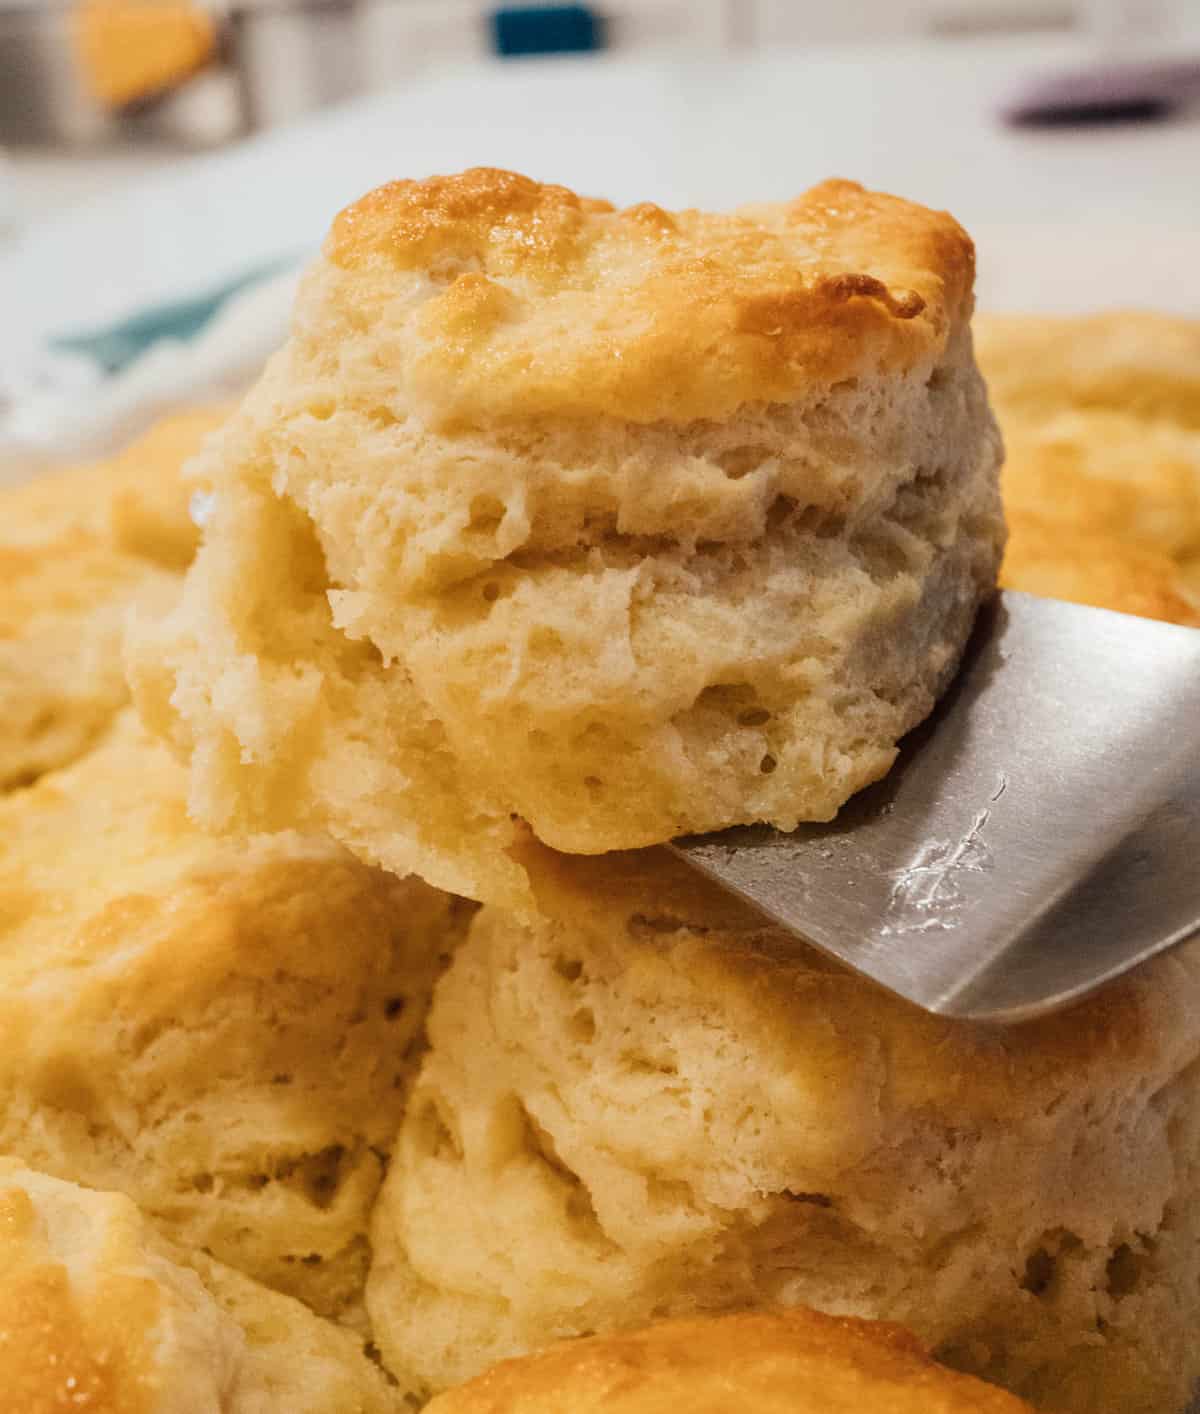 You'll want these biscuits on your breakfast table! They're so fluffy, buttery, and incredibly tender. You won't be able to just eat one! #biscuits #breakfast #breakfastrecipes